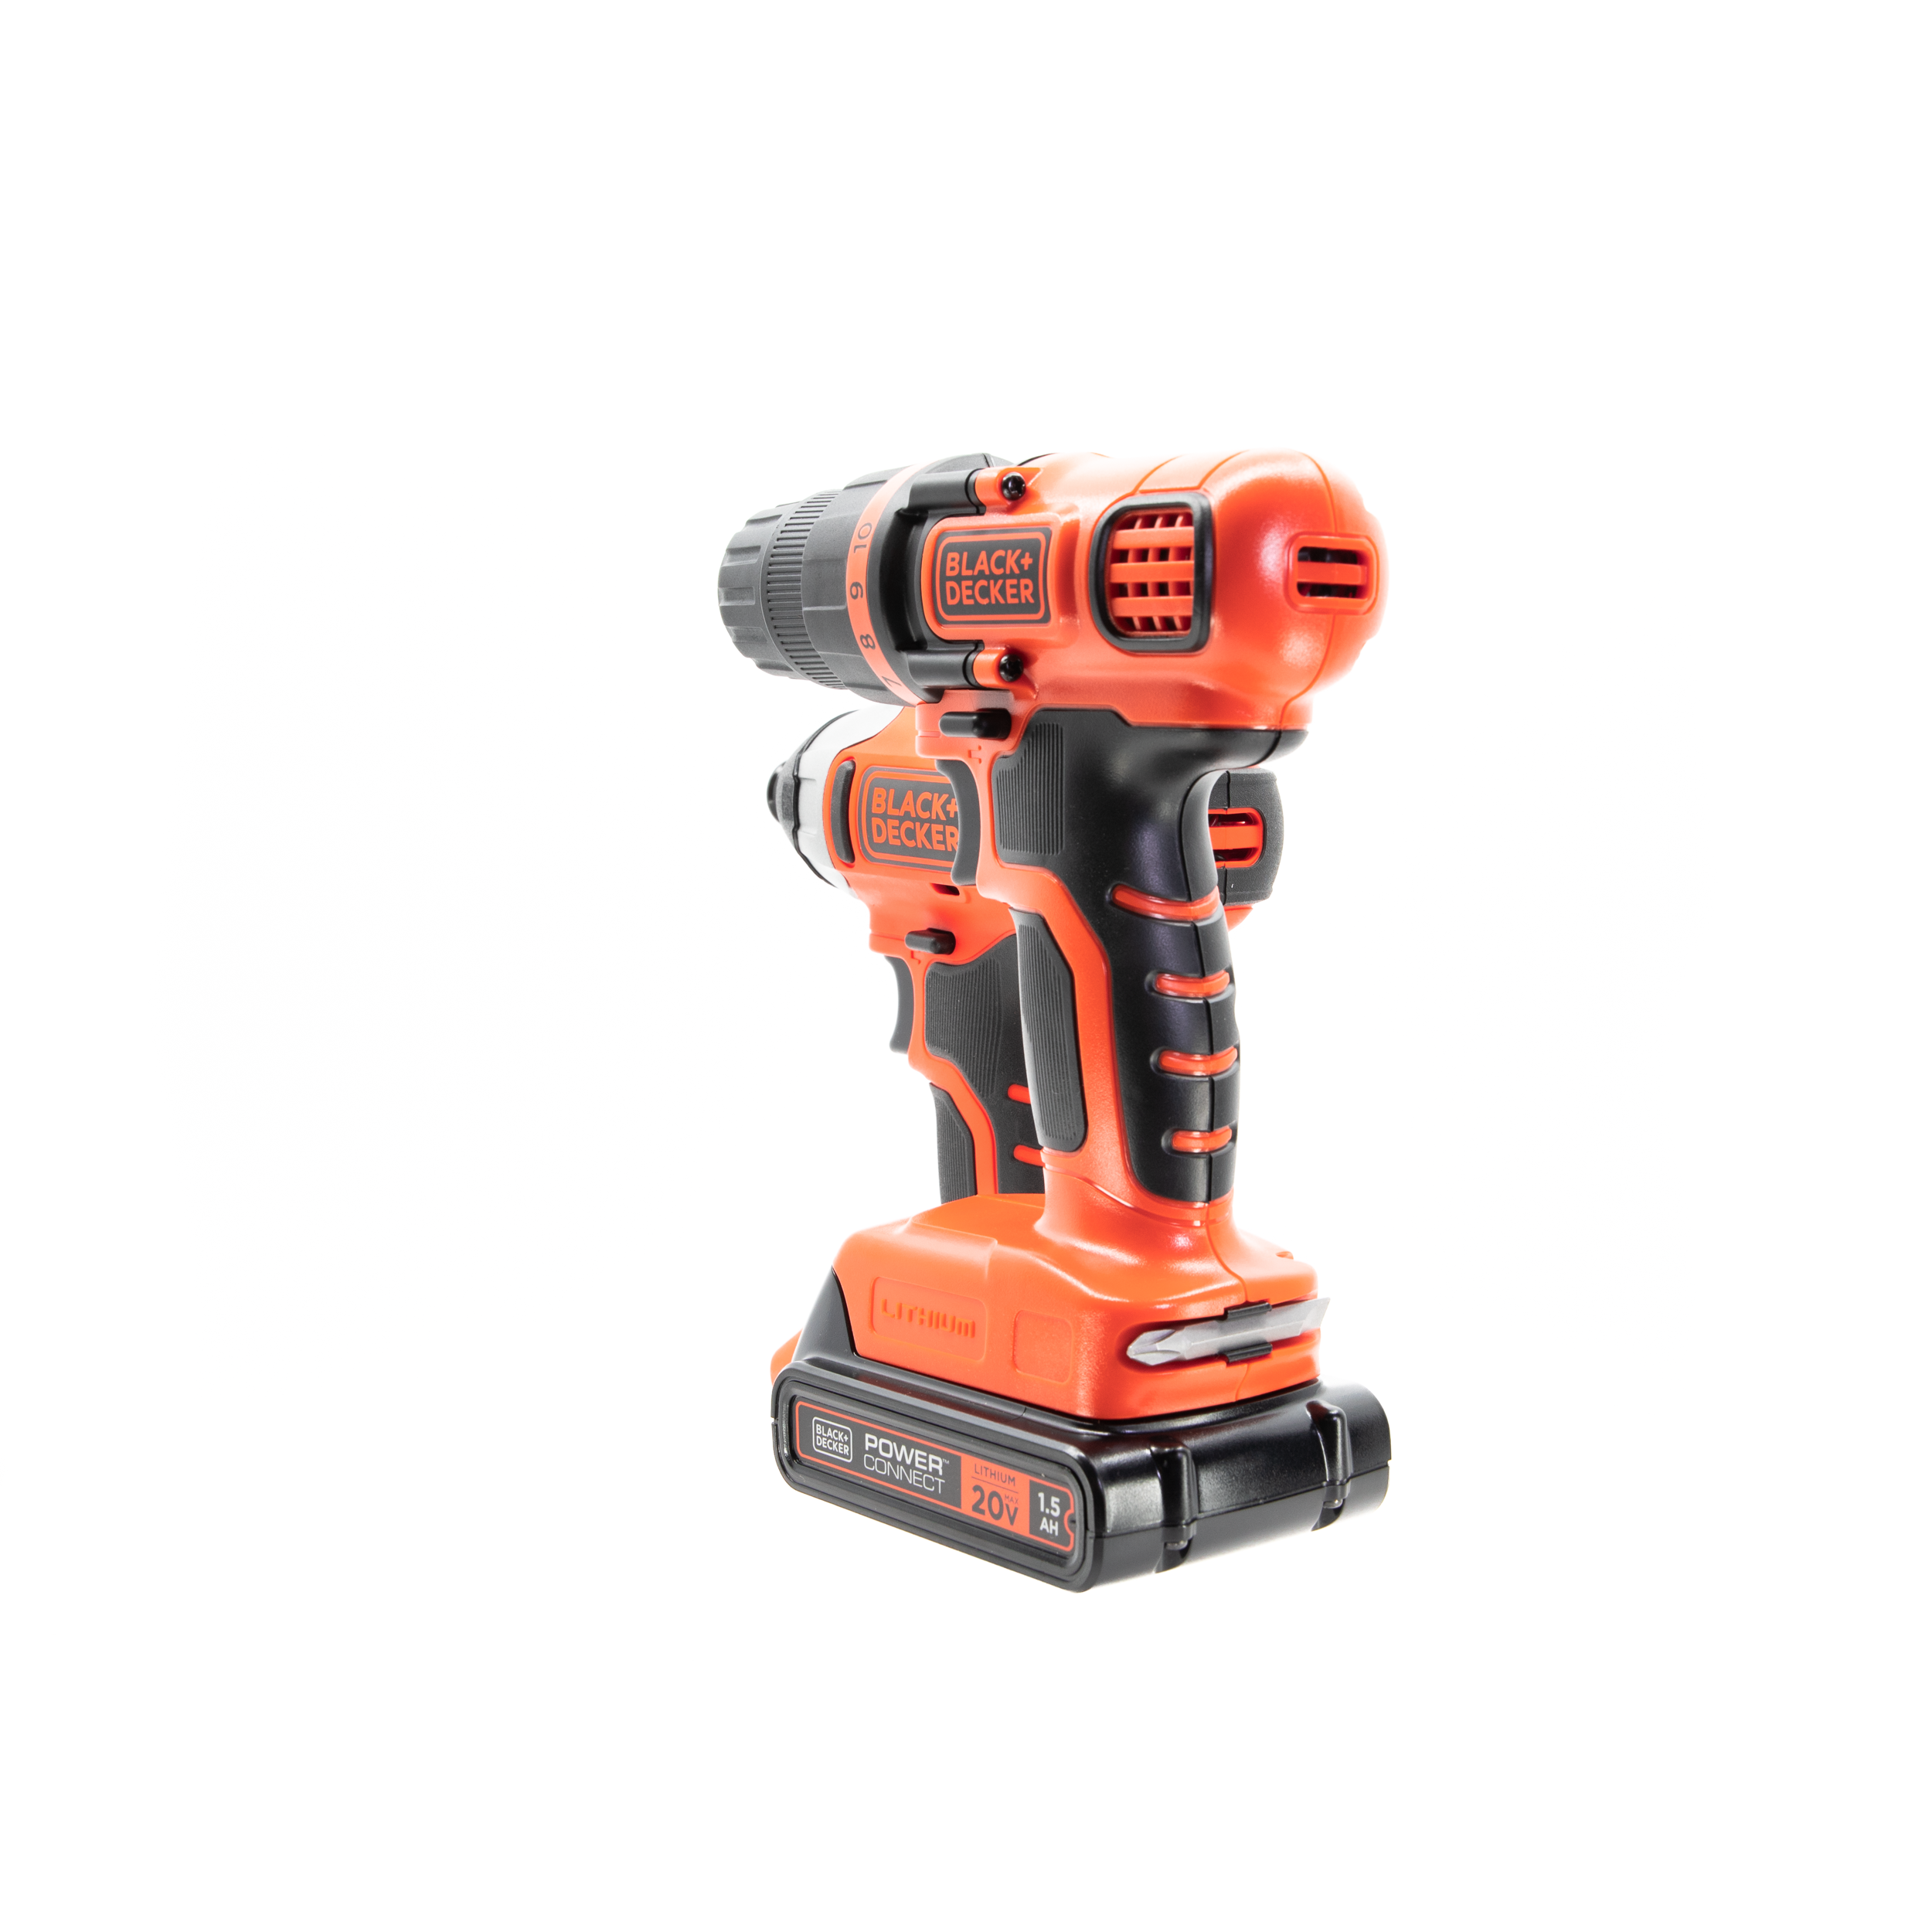  BLACK+DECKER 20V MAX Cordless Drill/Driver Combo Kit w/Saw &  Extra 1.5-Ah Lithium Battery (BD2KITCDDCS & LBXR20) : Everything Else